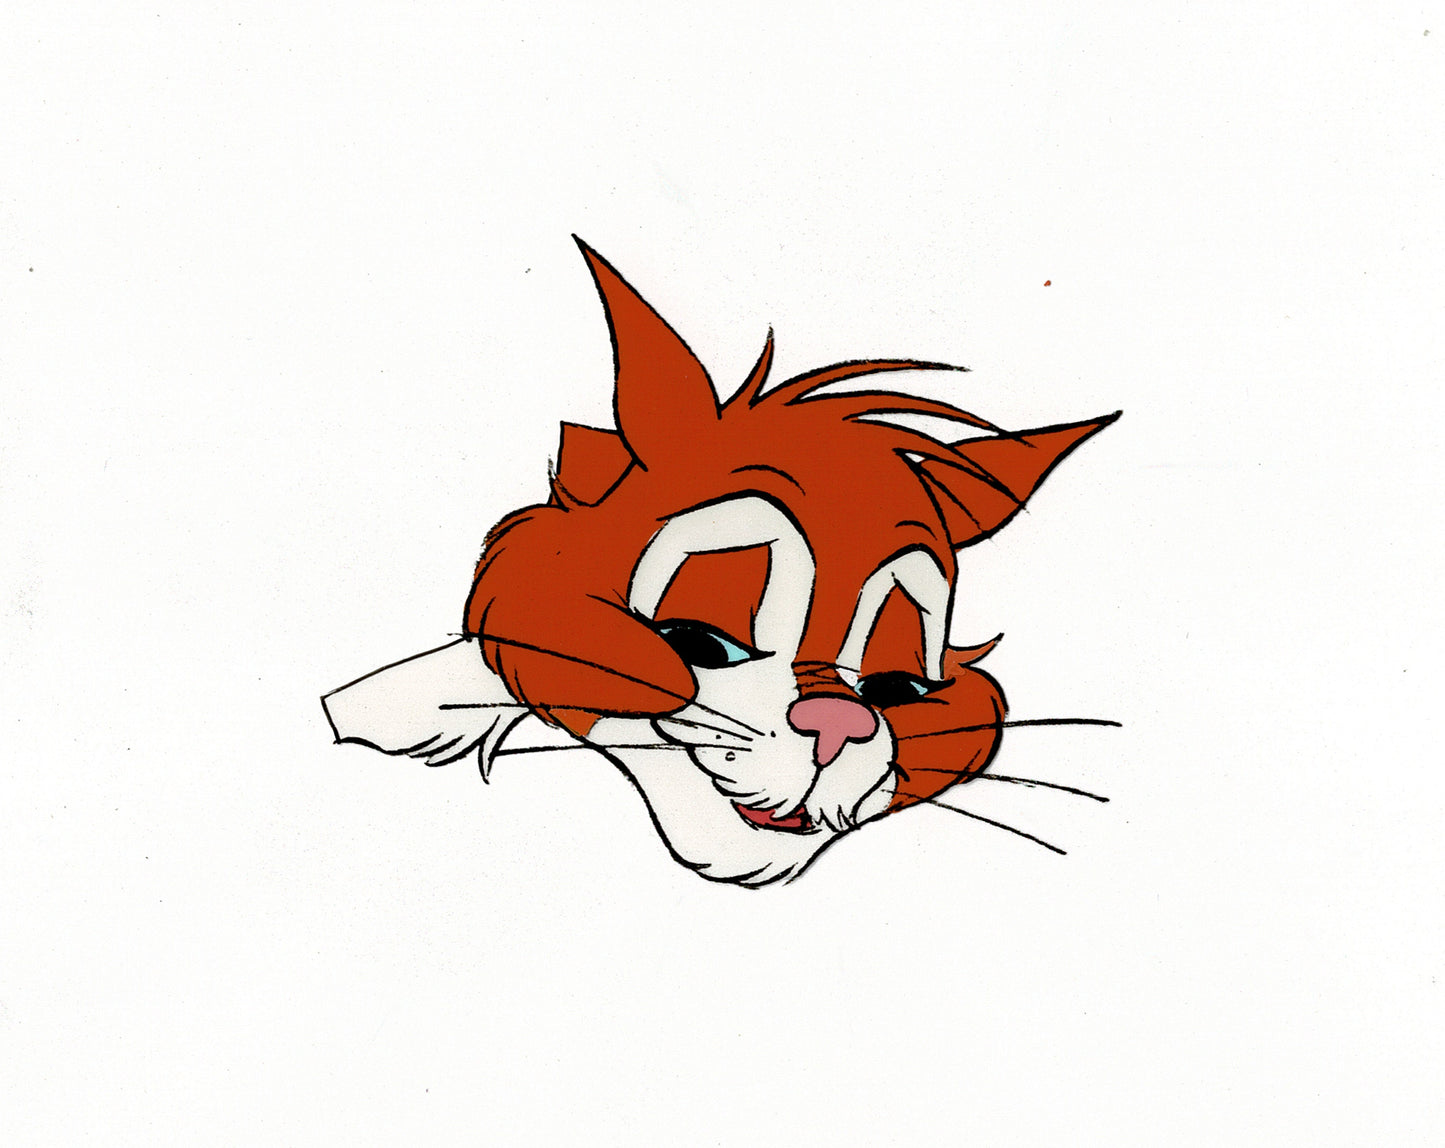 Yankee Doodle Cricket Harry the Cat by Chuck Jones 1975 Original Production Animation Cel With Studio Seal 44